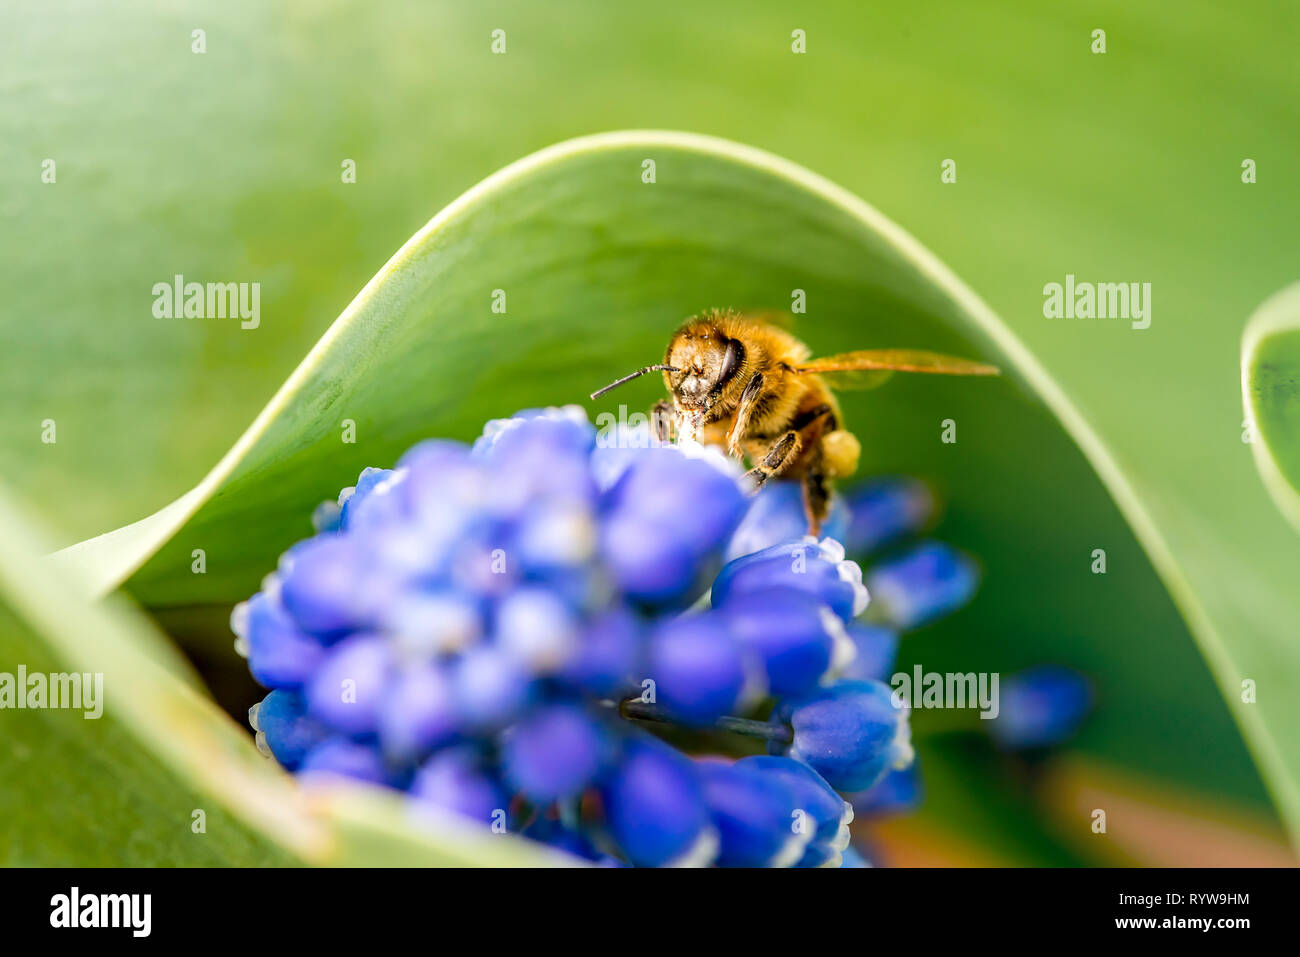 A single Bee on a purple flower collecting pollen Stock Photo